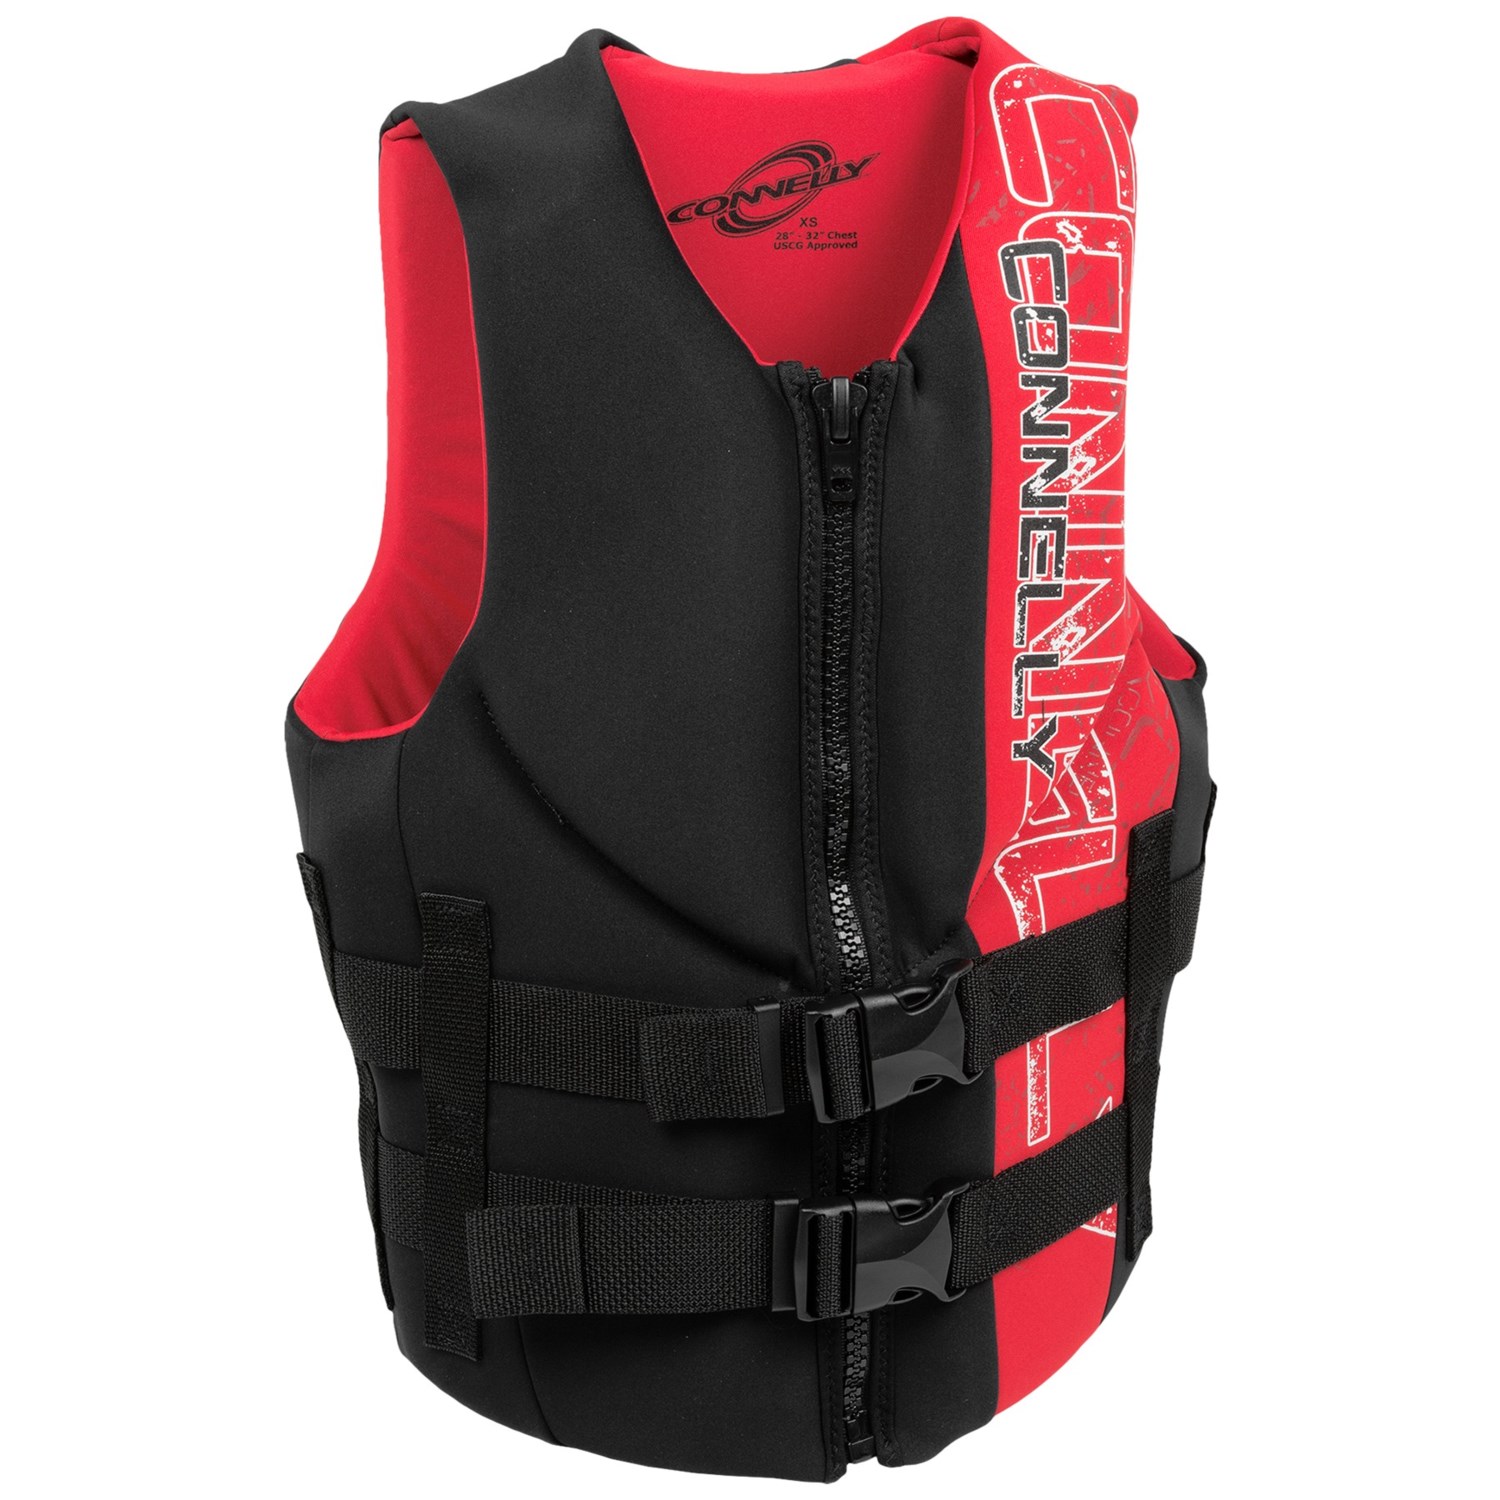 Connelly Teen PFD Life Jacket - Type III 7666G - Save 35%